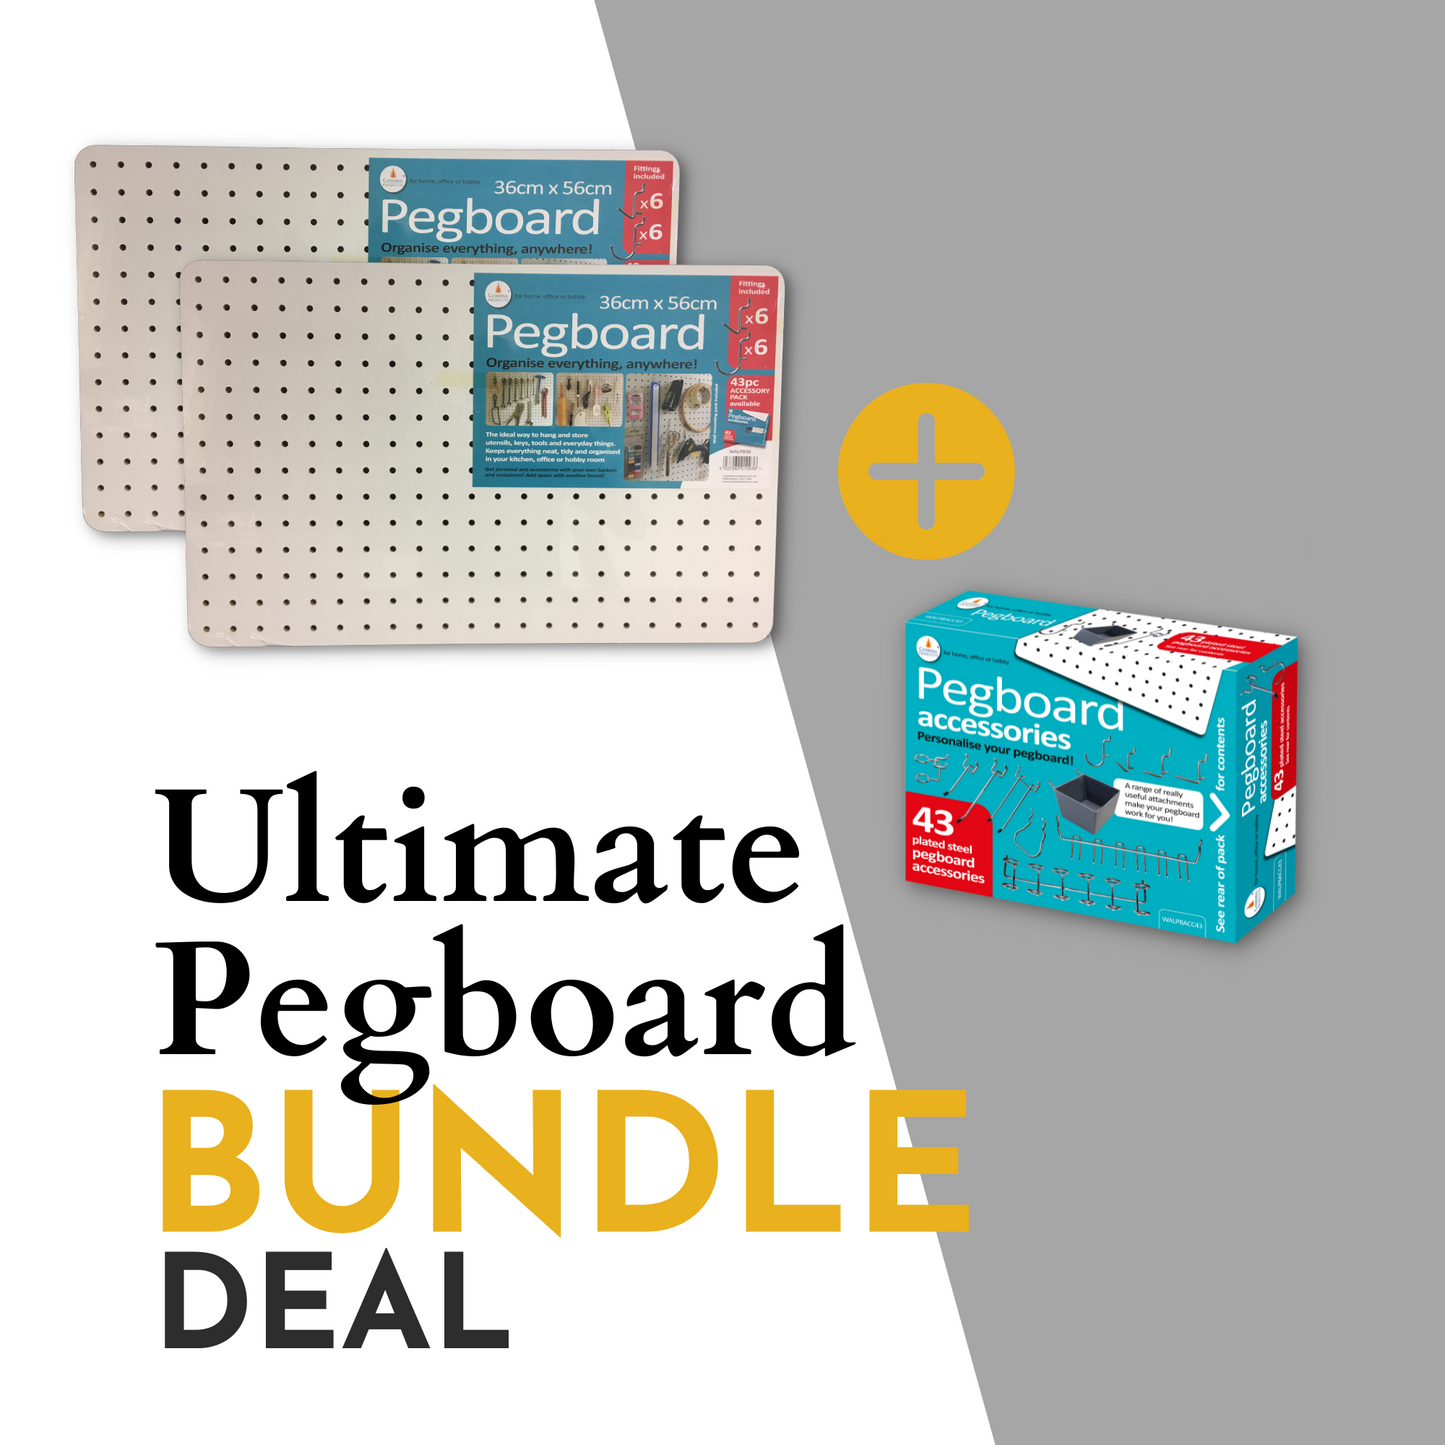 This image shows an "Ultimate Pegboard BUNDLE DEAL." It showcases two pegboards, each 36cm by 56cm in size, accompanied by a box of 43 pegboard accessories. The graphic shows that purchasing this bundle deal provides a comprehensive solution for organizing tools or materials in a workspace, with a variety of accessories to customize the setup to the buyer’s needs. The graphic uses a plus sign to indicate that the pegboards and accessories are offered together, at a special price.